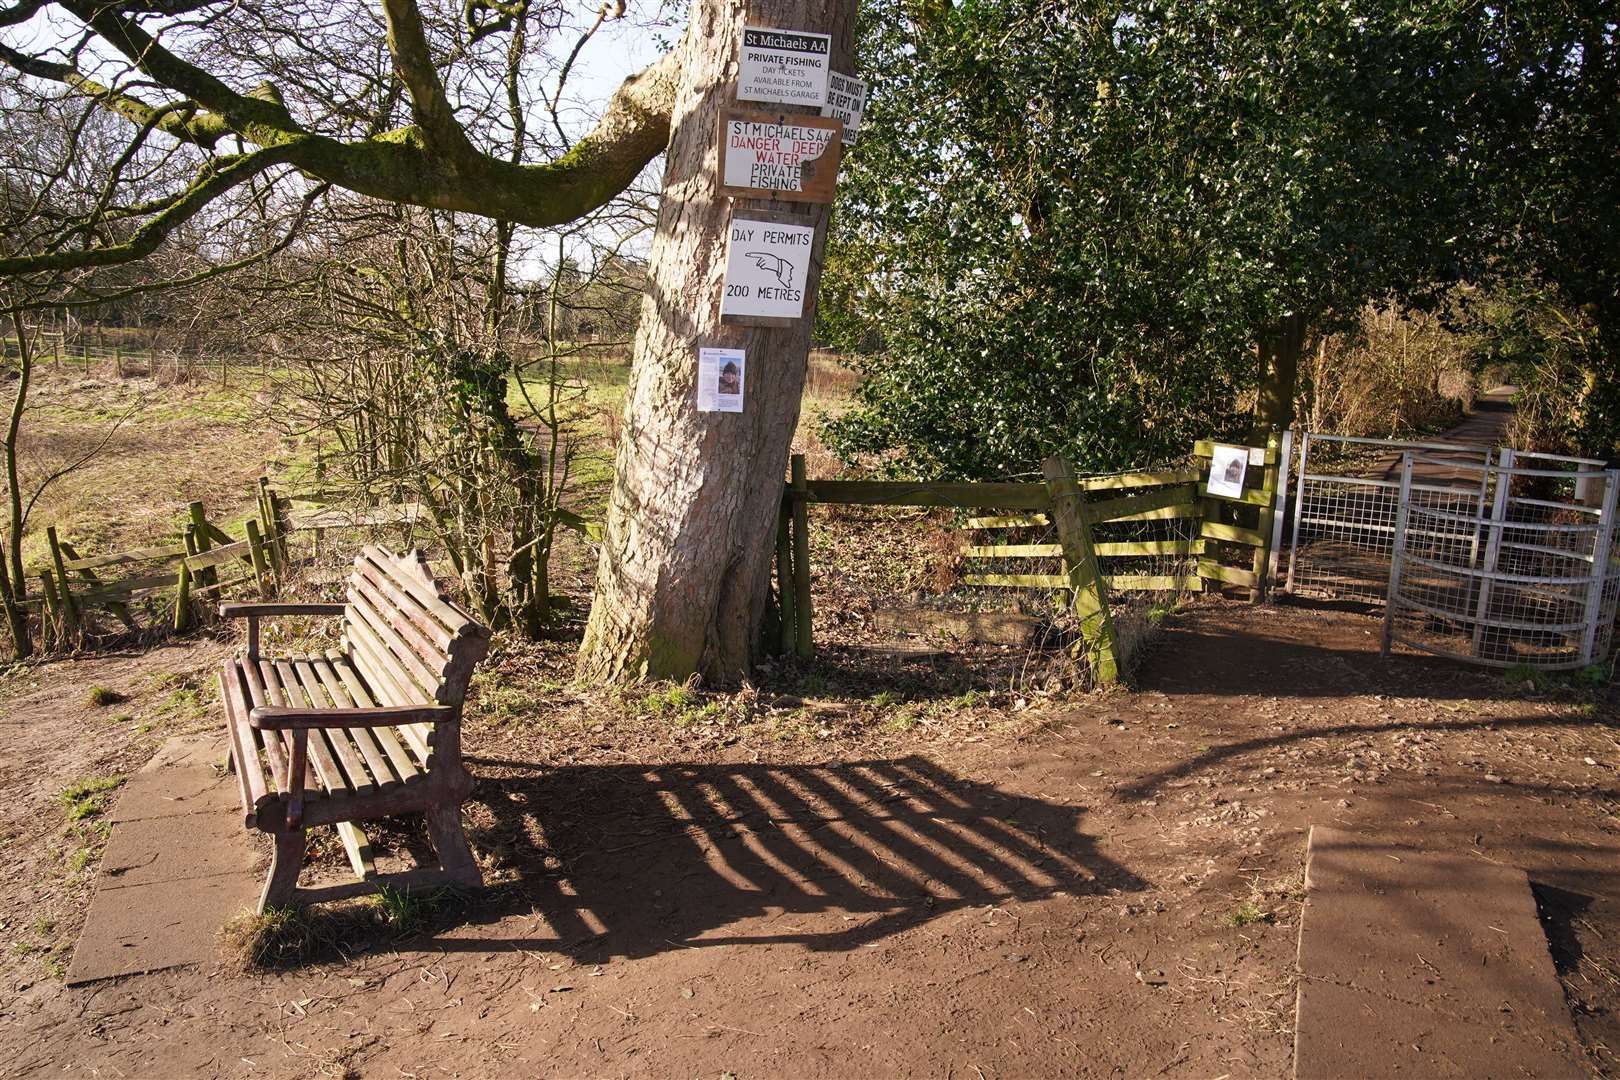 The bench where Nicola Bulley’s phone was found, on the banks of the River Wyre in St Michael’s on Wyre, Lancashire (Peter Byrne/PA)